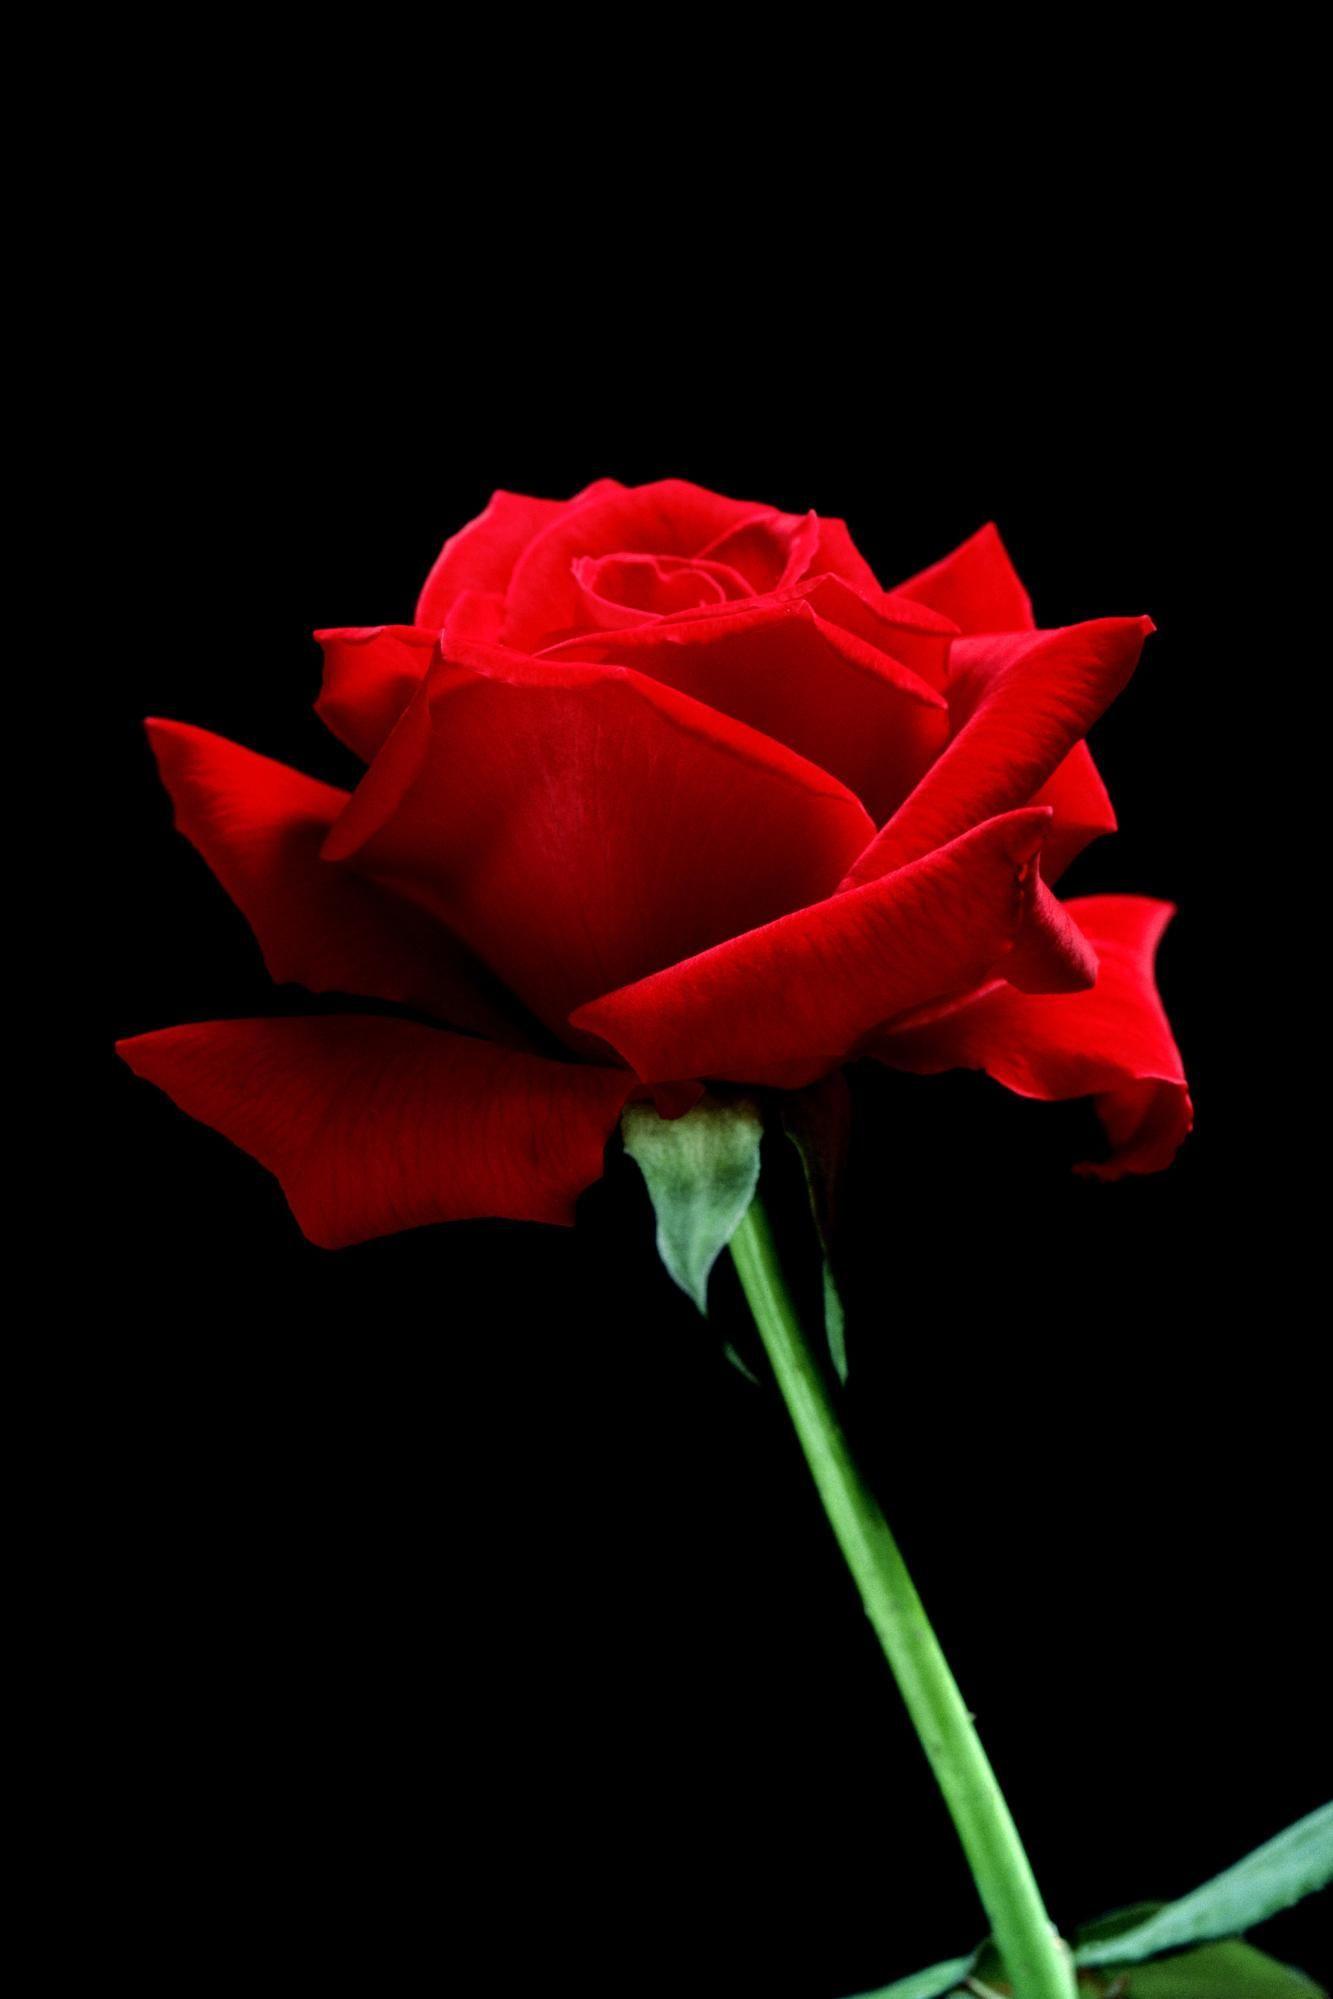 Rose. Nature Wallpaper HQ A Single Red Rose. Flowers